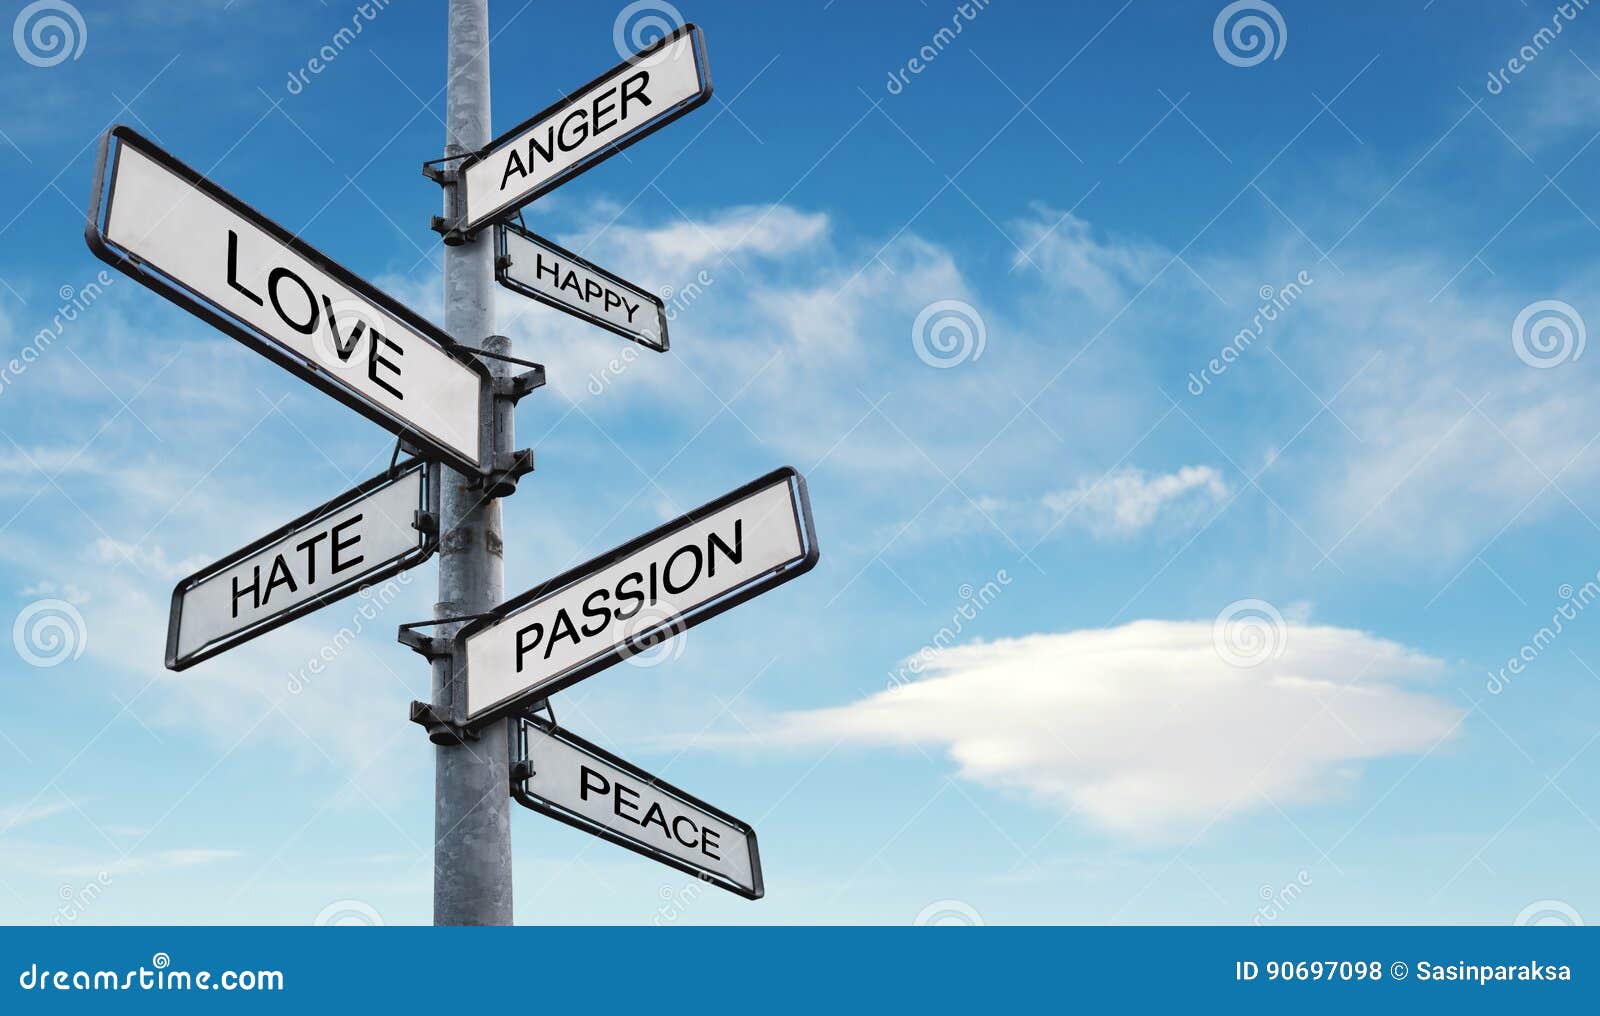 human feelings and emotions on sign post, on blue sky with white clouds backgrounds